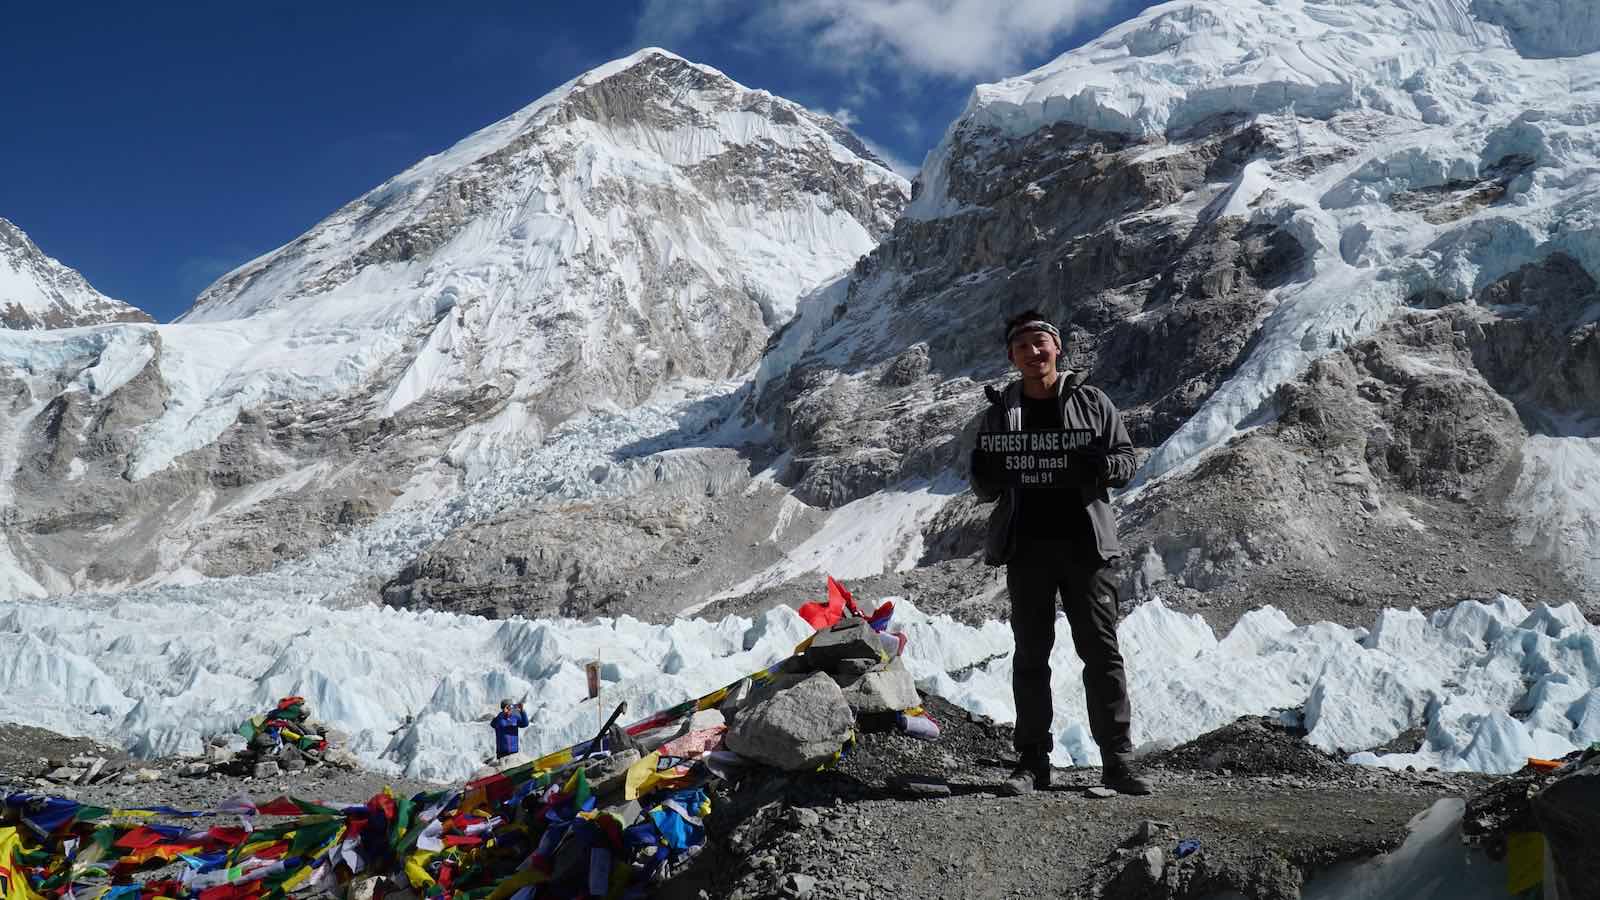 Made it to Everest Base Camp!